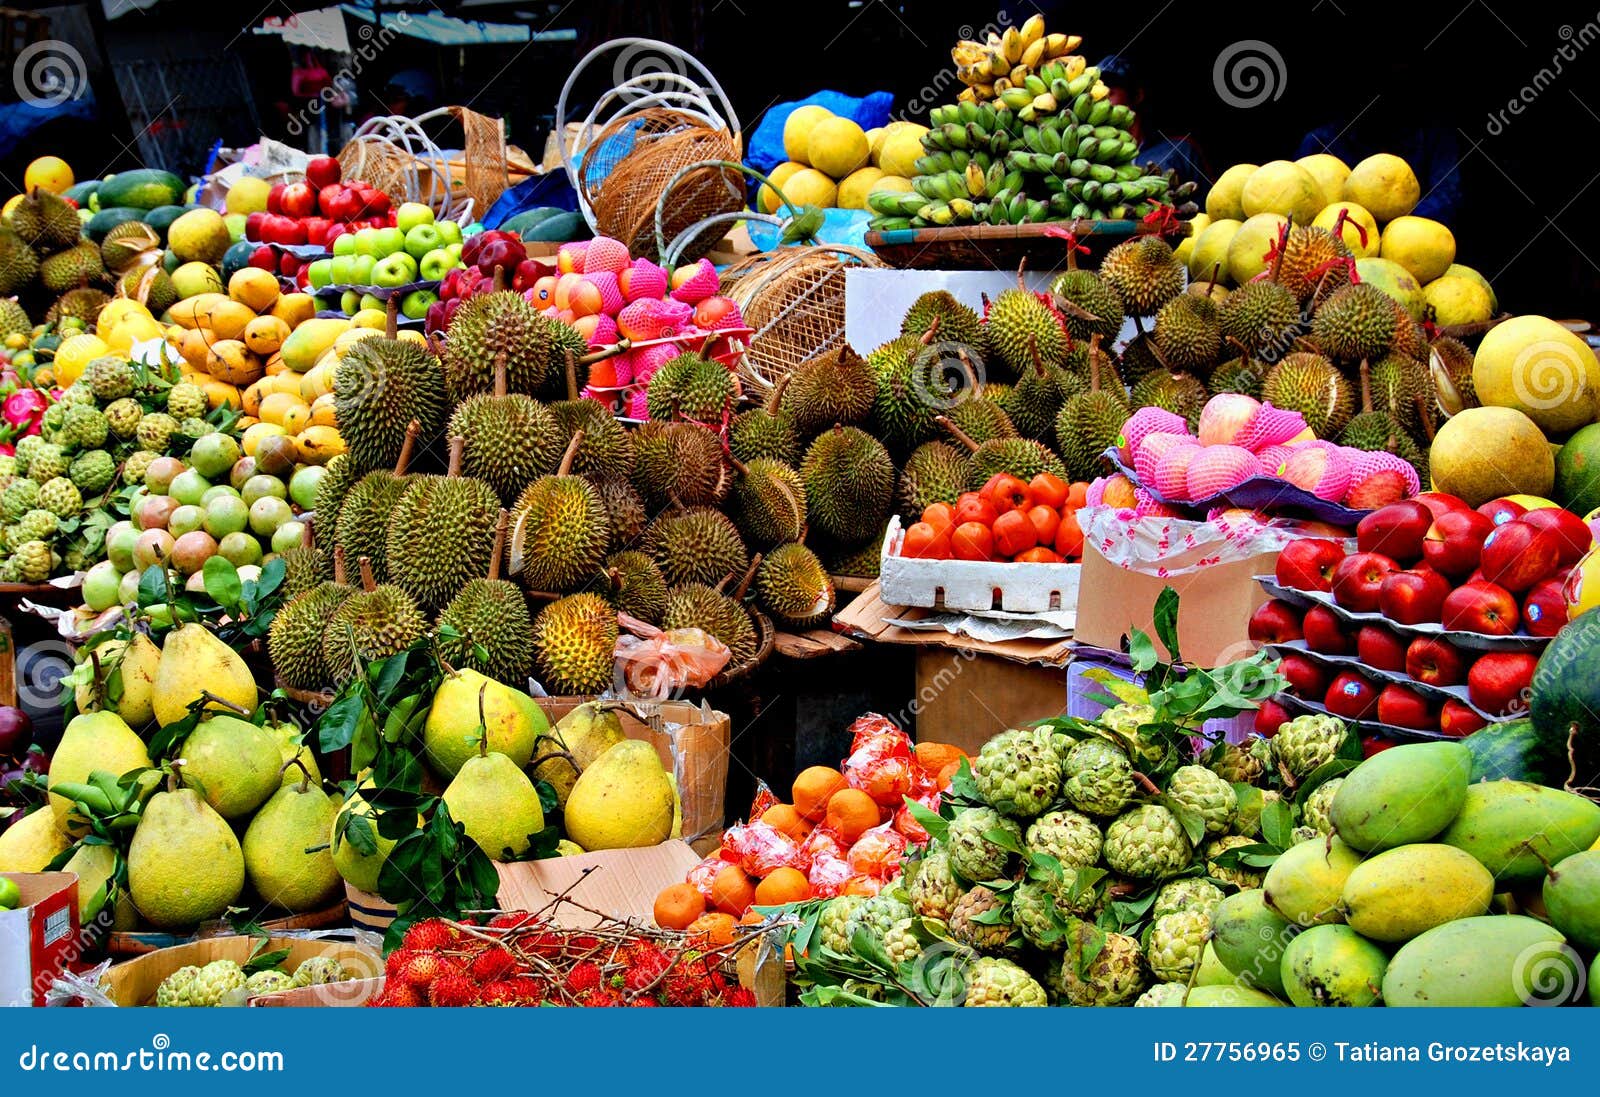 exotic fruits and vegetables